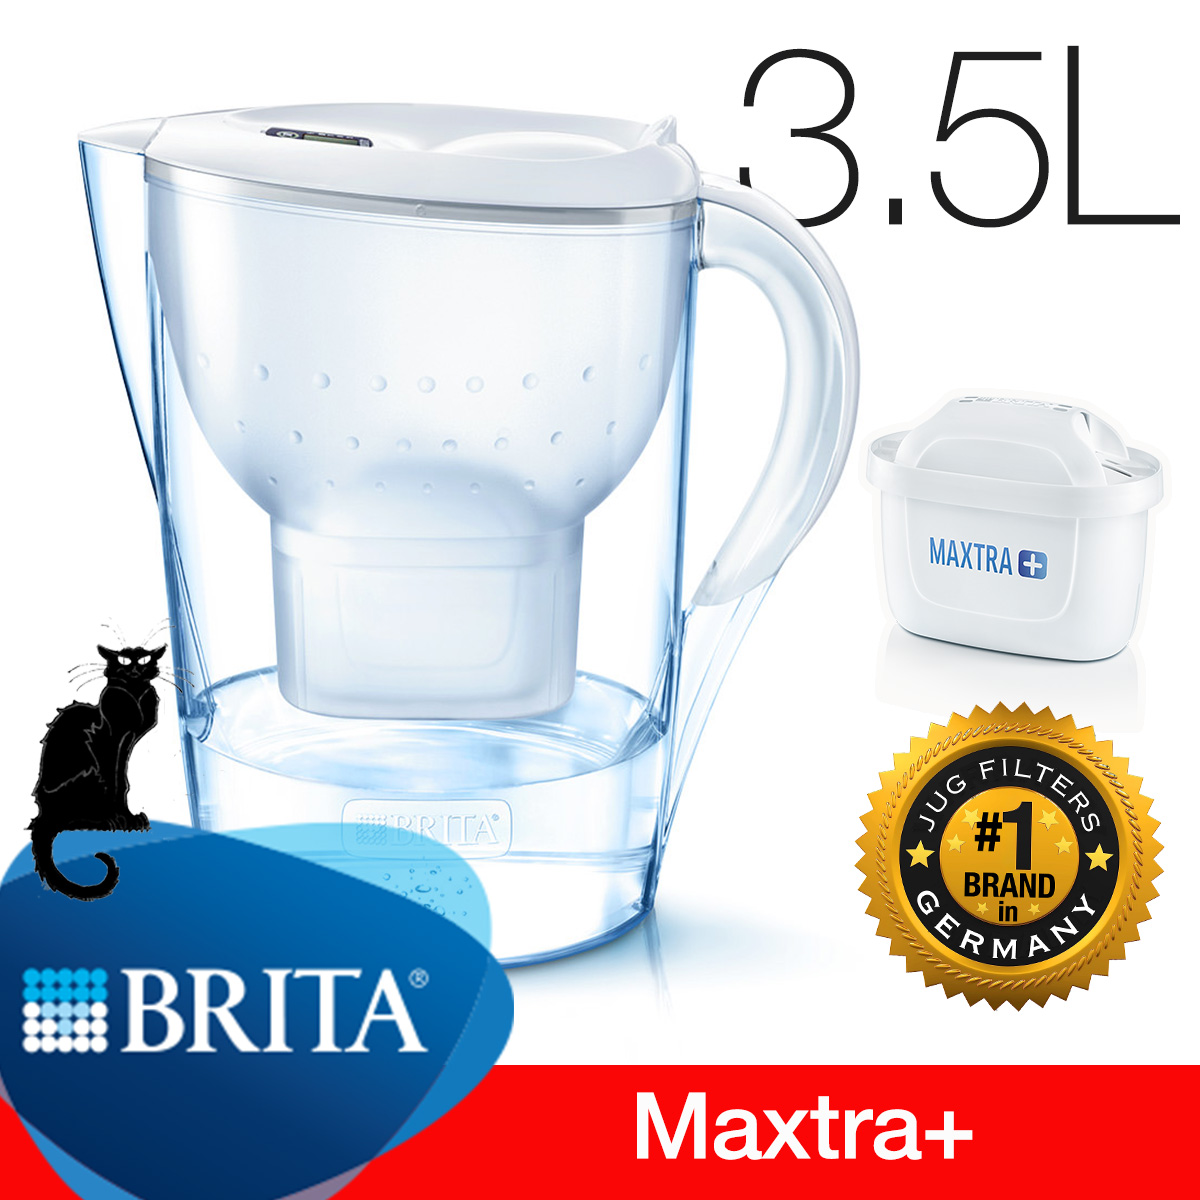 BRITA Marella Water Filter Jug 3.5 L Water Cleaner Pitcher Includes 3  MAXTRA+ Filter Cartridge Purification Filter Blue Colour